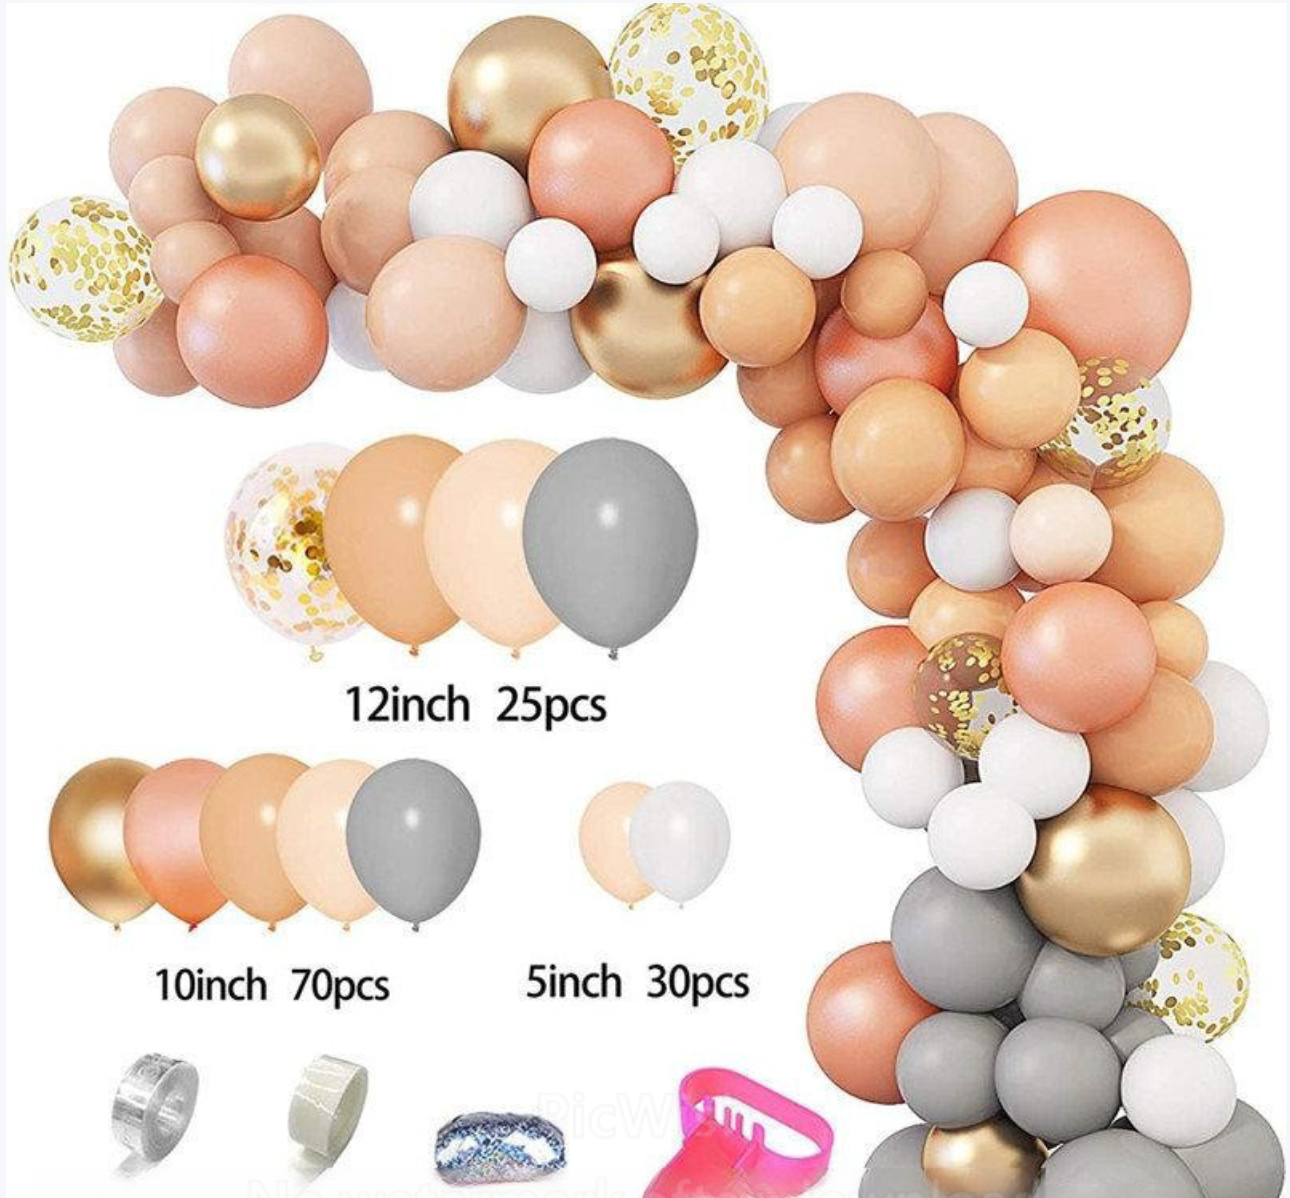 Rose Gold & Nude Balloon Decoration Set - Large Quantity for Stunning Balloon Arrangements